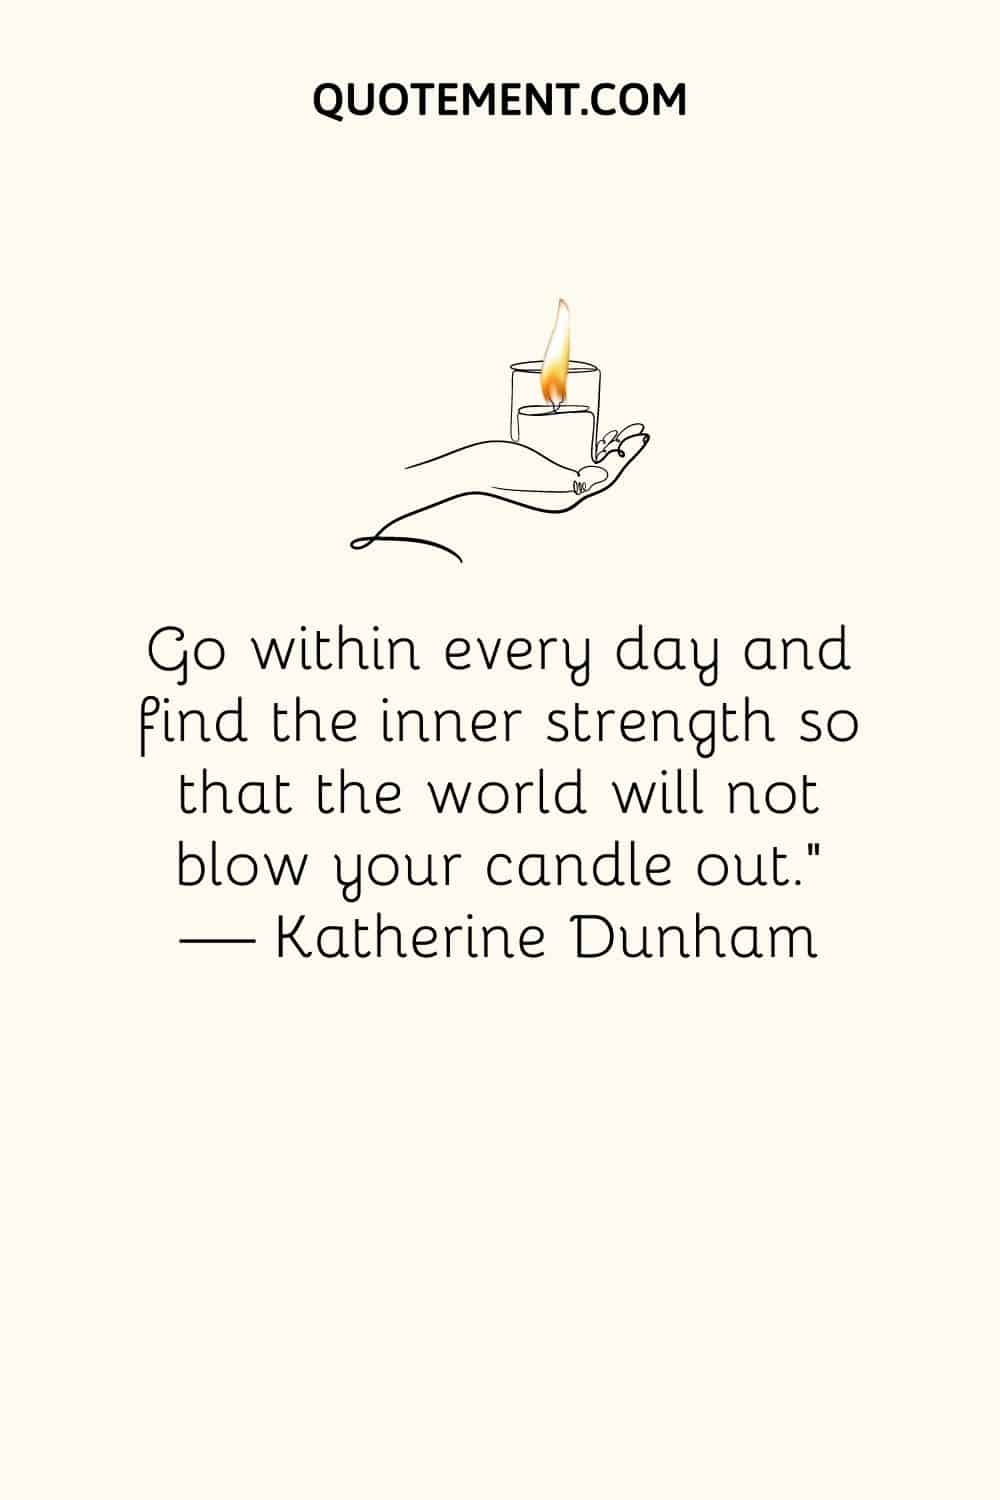 illustration of a hand holding a candle representing positive inner strength quote